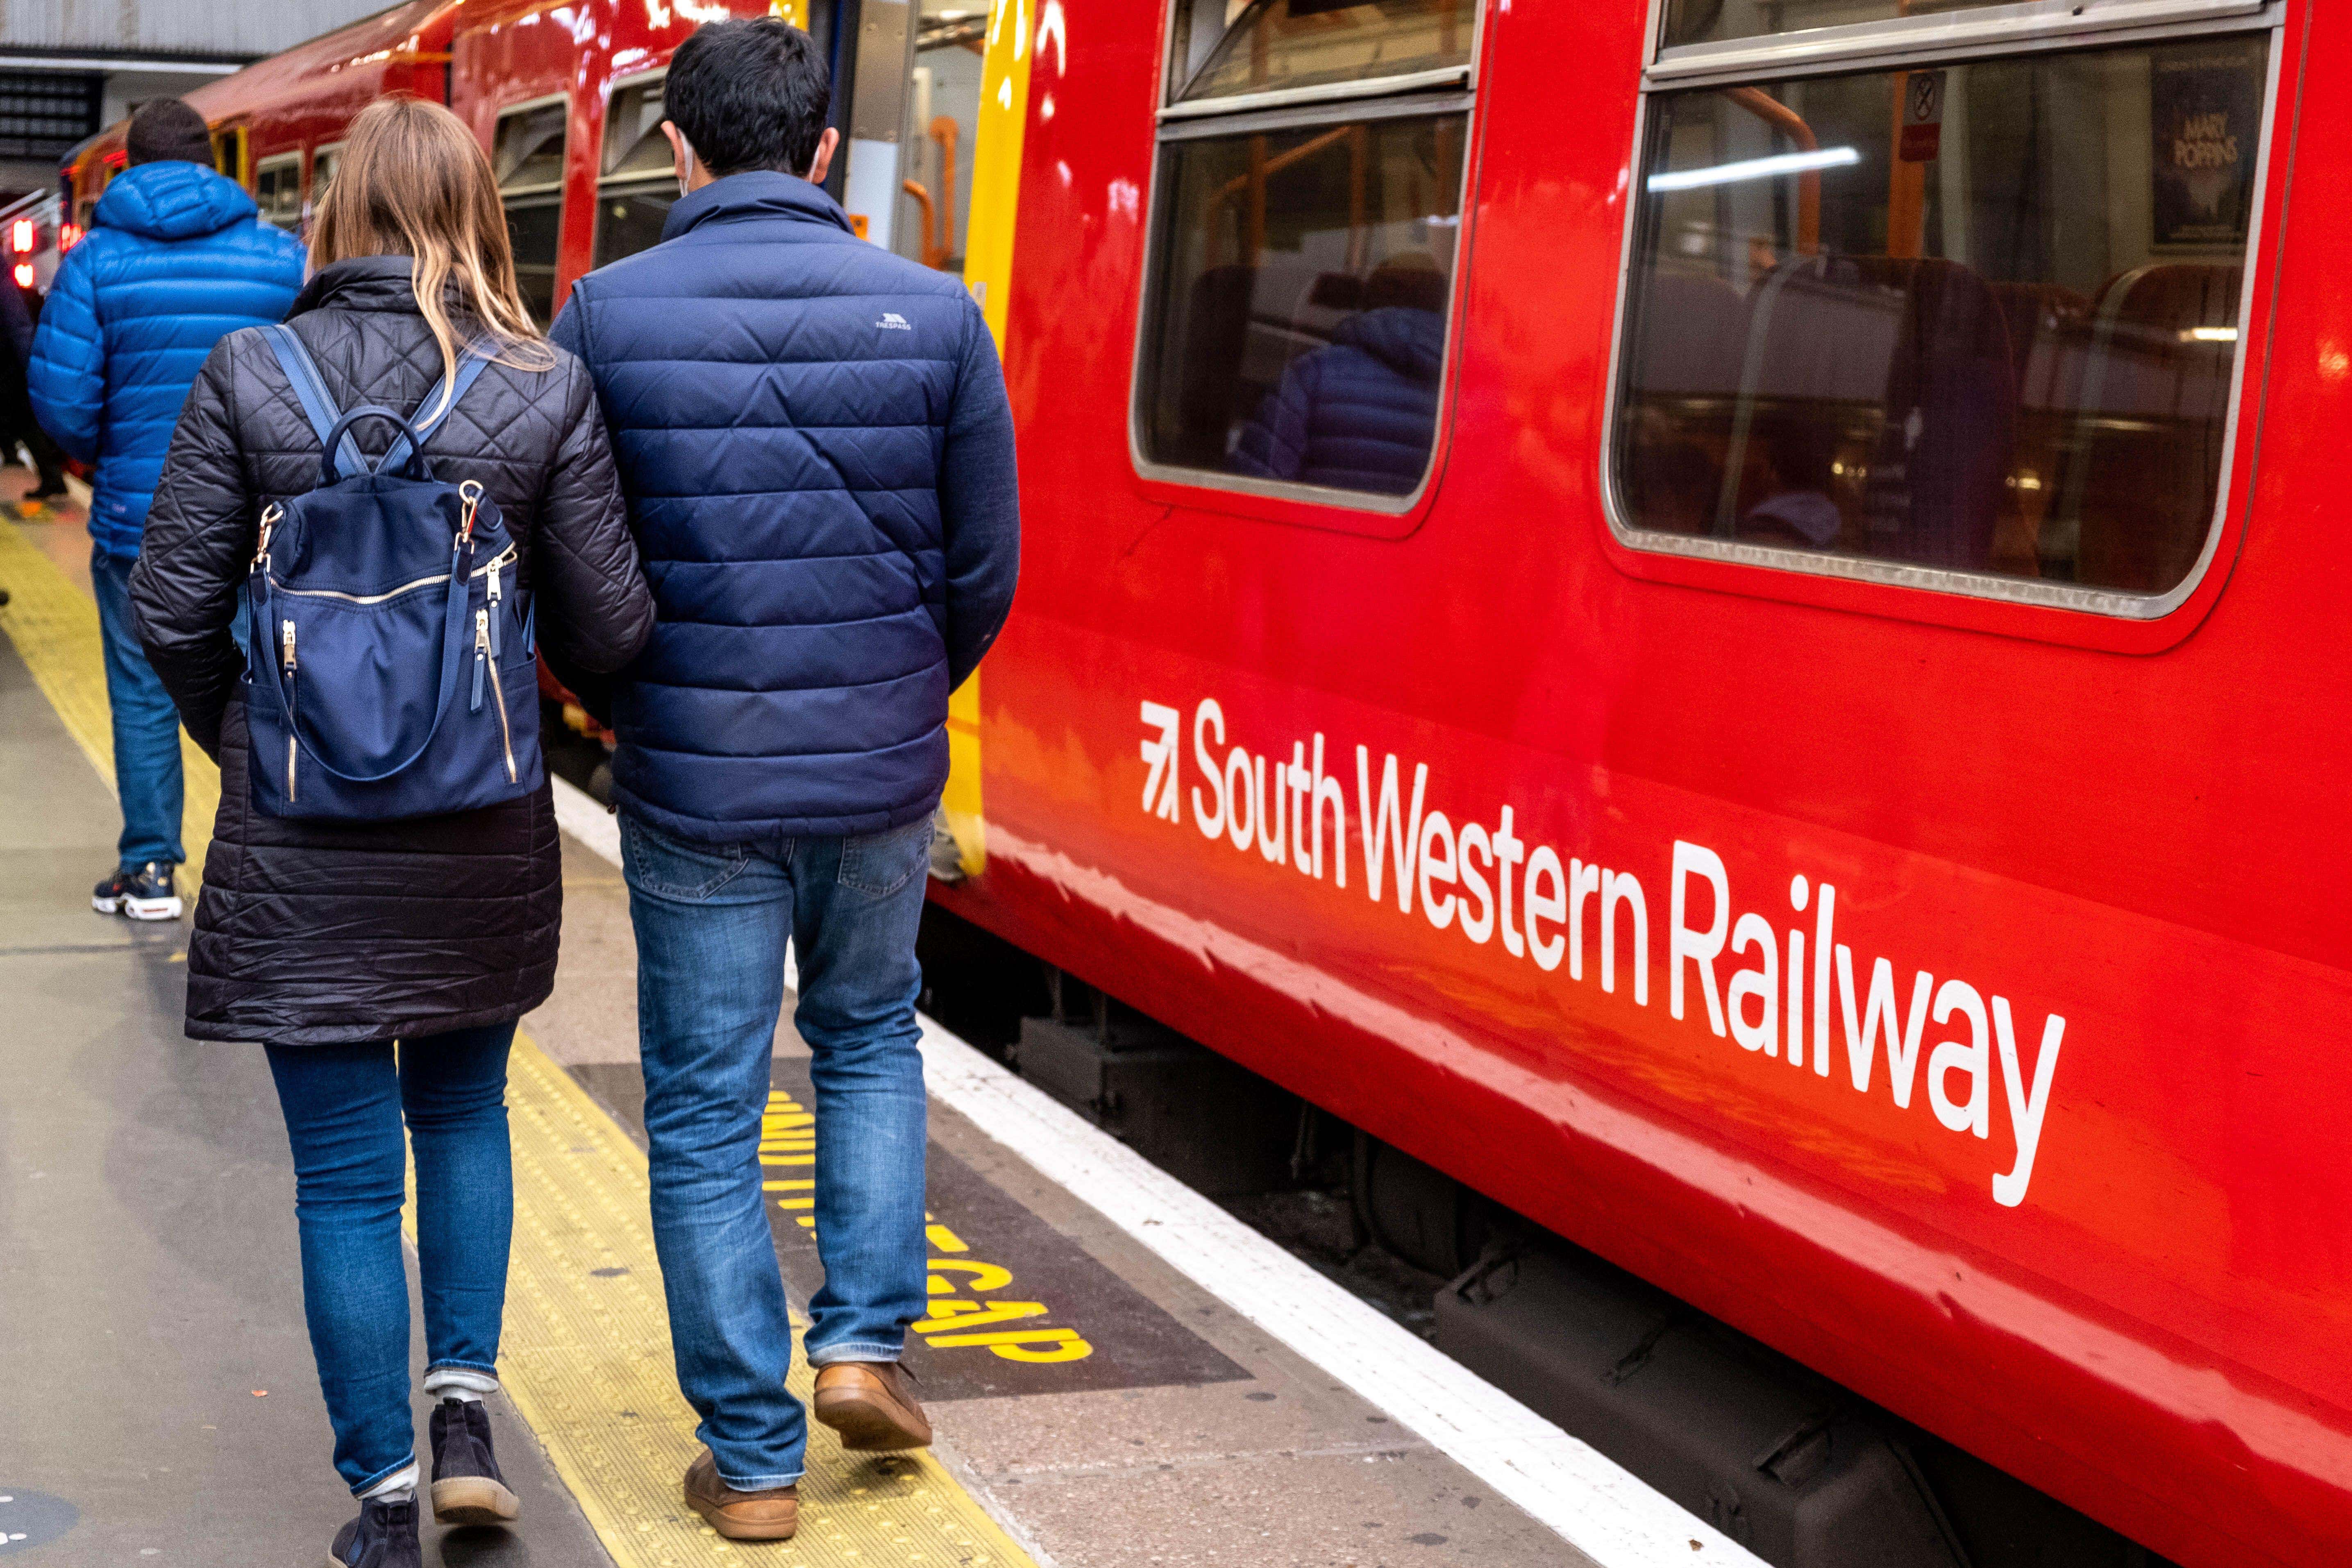 Network Rail has denied recording passengers’ emotions as part of trial of AI cameras (Alamy/PA)